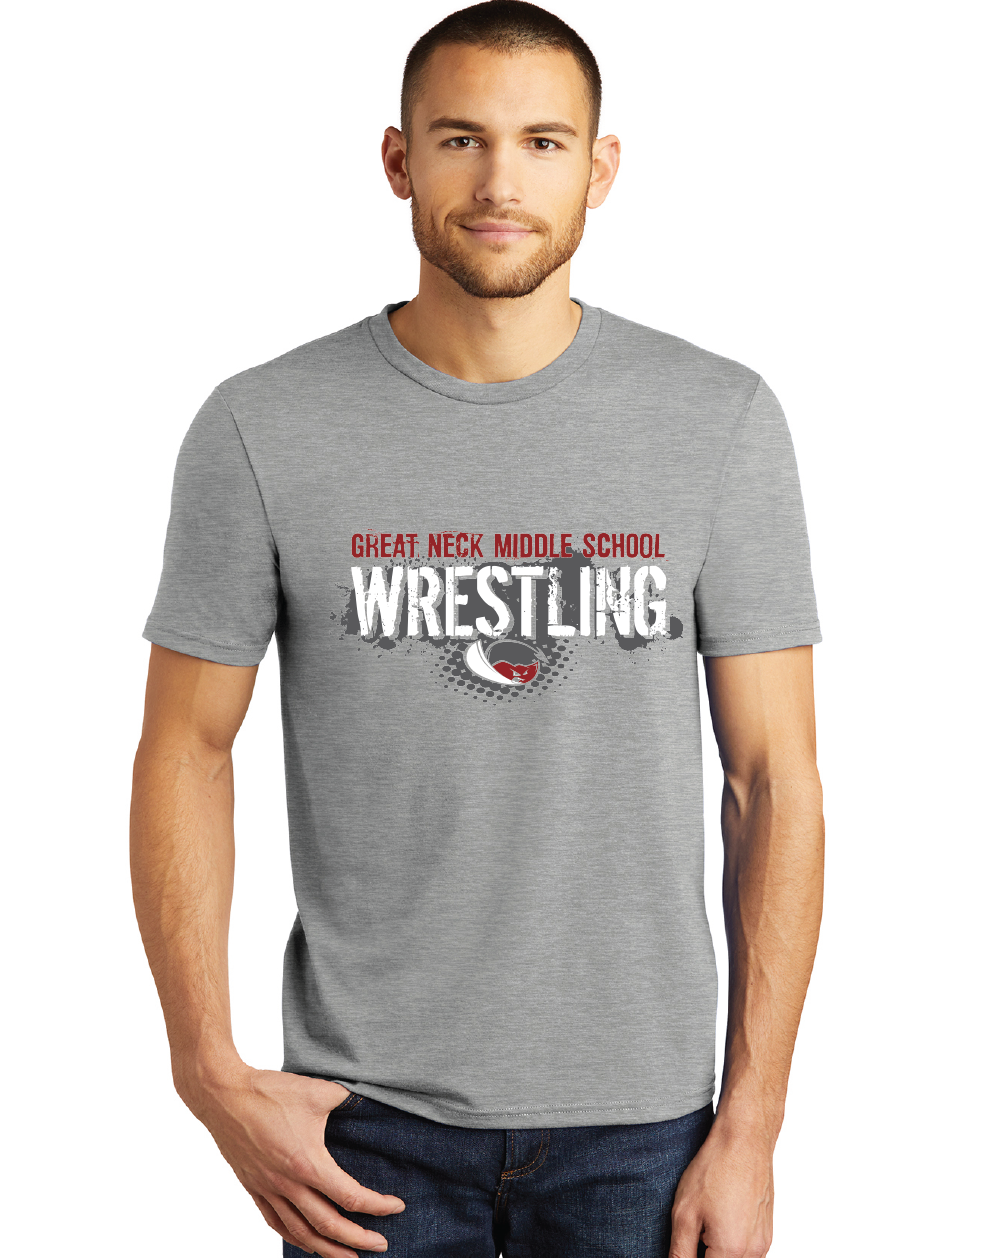 Softstyle Tee / Grey Frost / Great Neck Middle School Wrestling